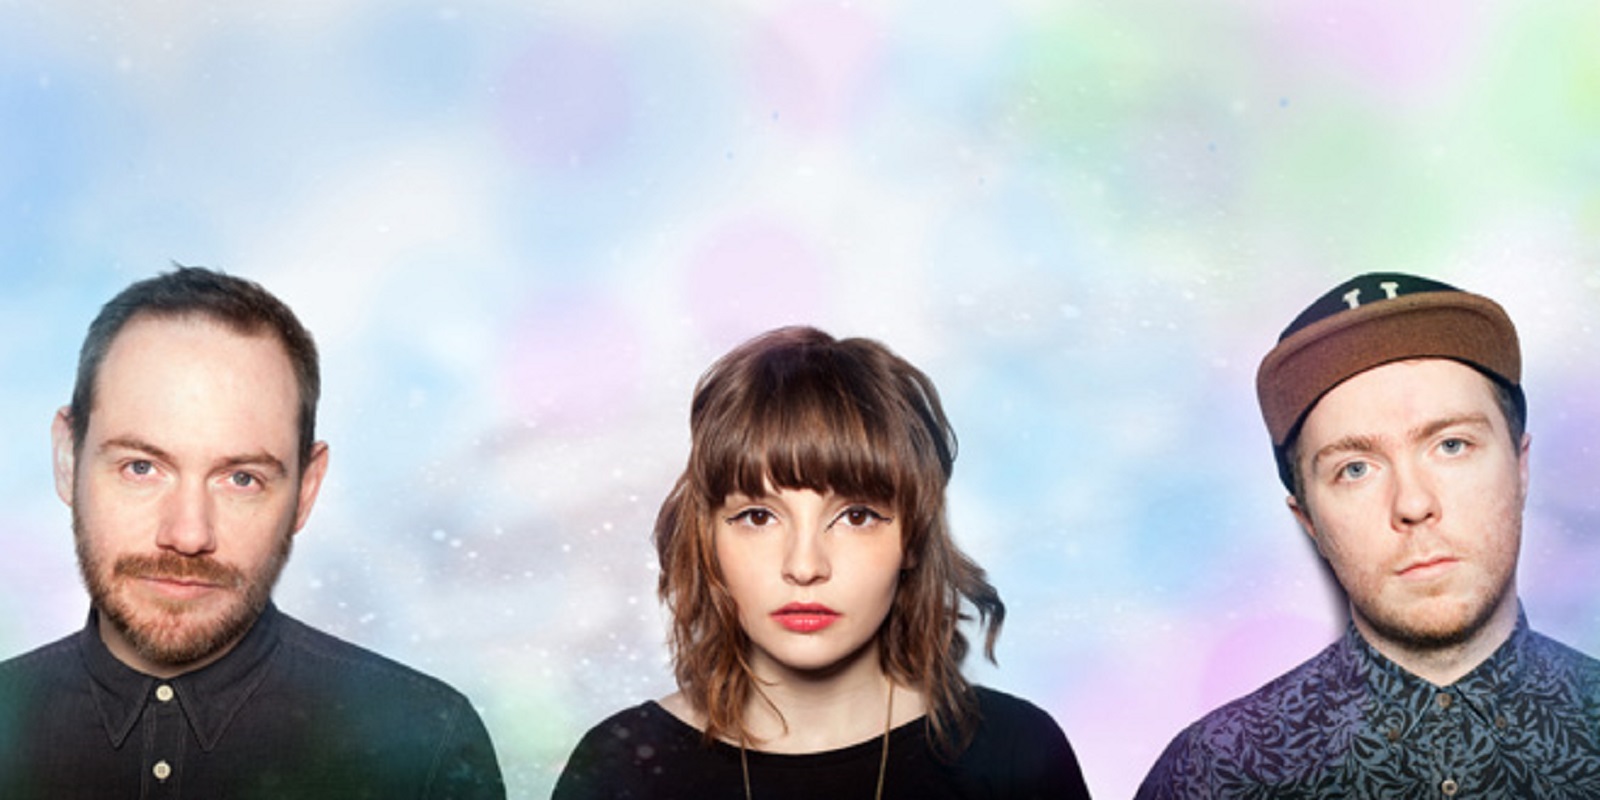 Crowd Sourced: Chvrches at Music Hall of Williamsburg